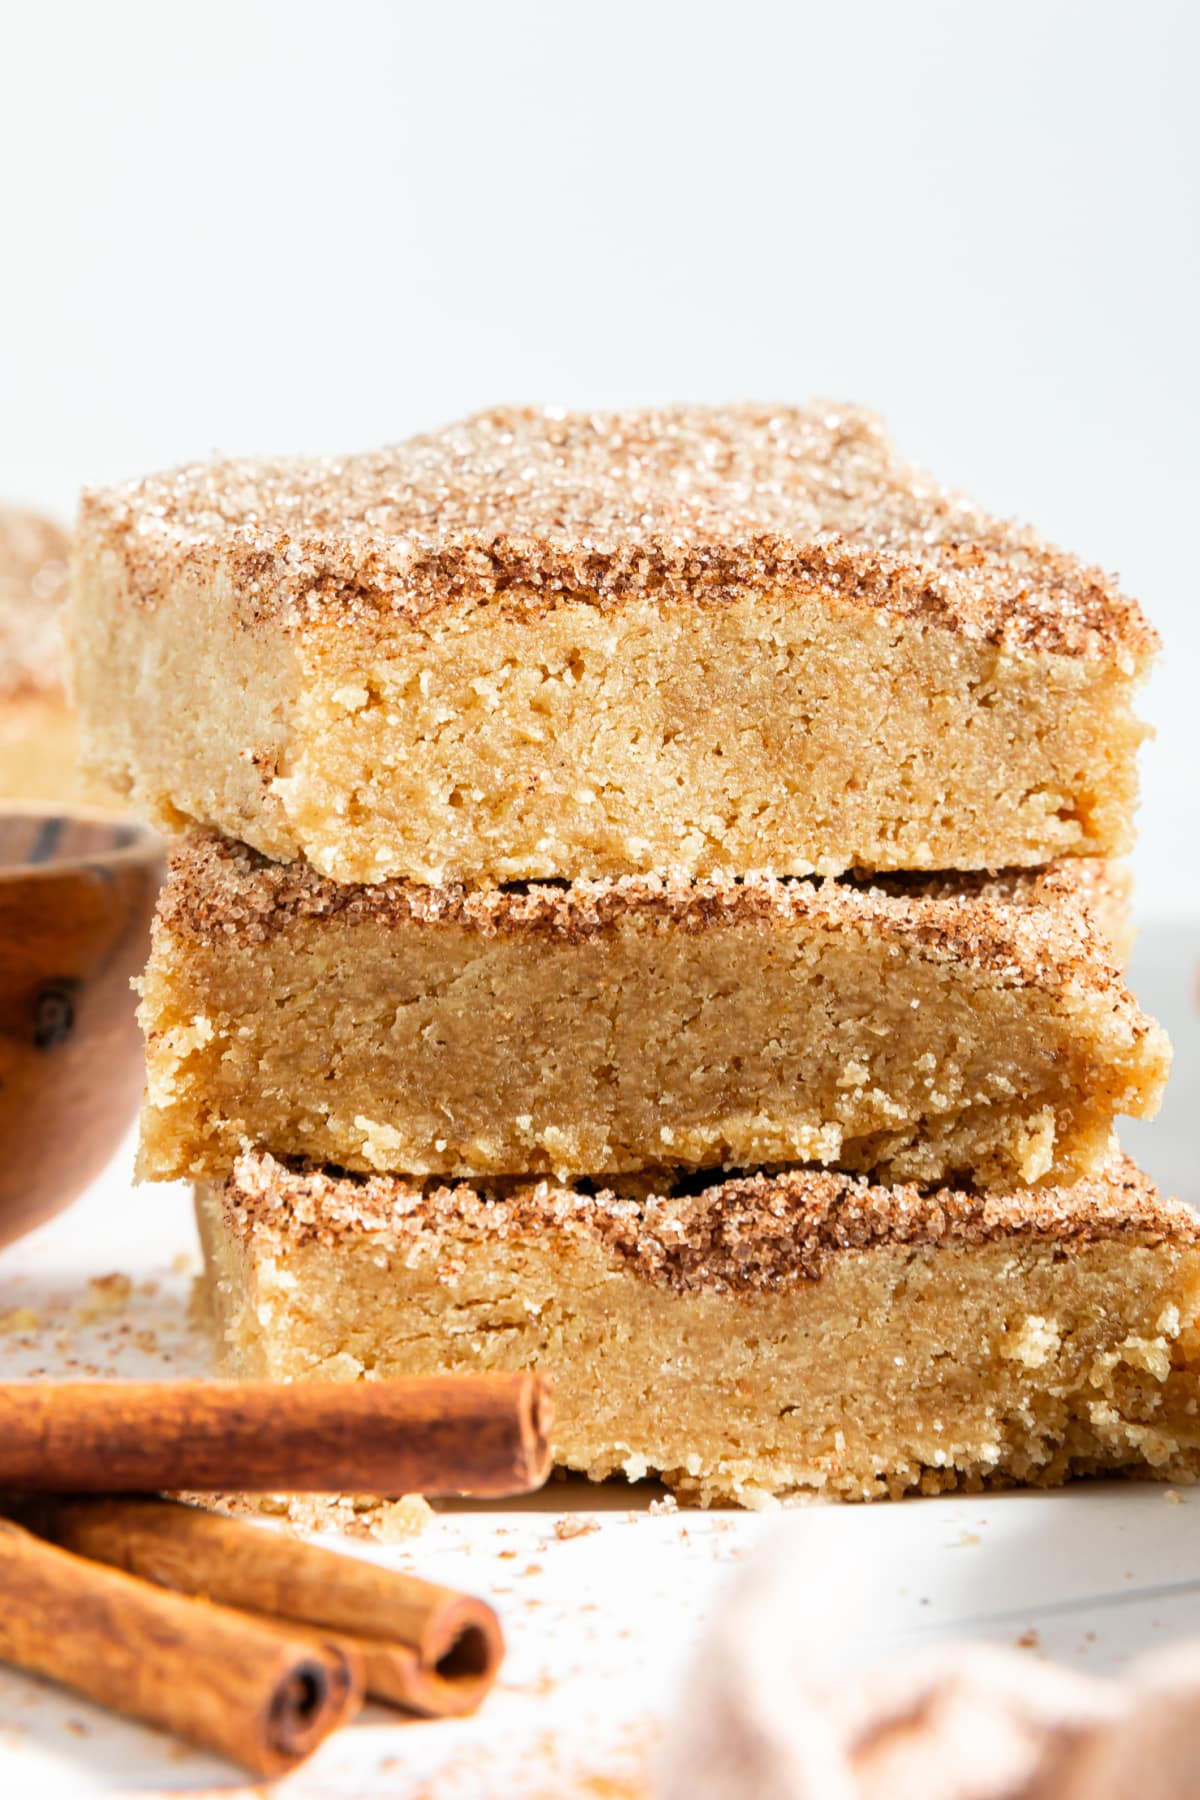 Three squares of snickerdoodle blondies stacked on top of each other. Blondies are topped with a cinnamon sugar mixture, and sit next to cinnamon sticks.